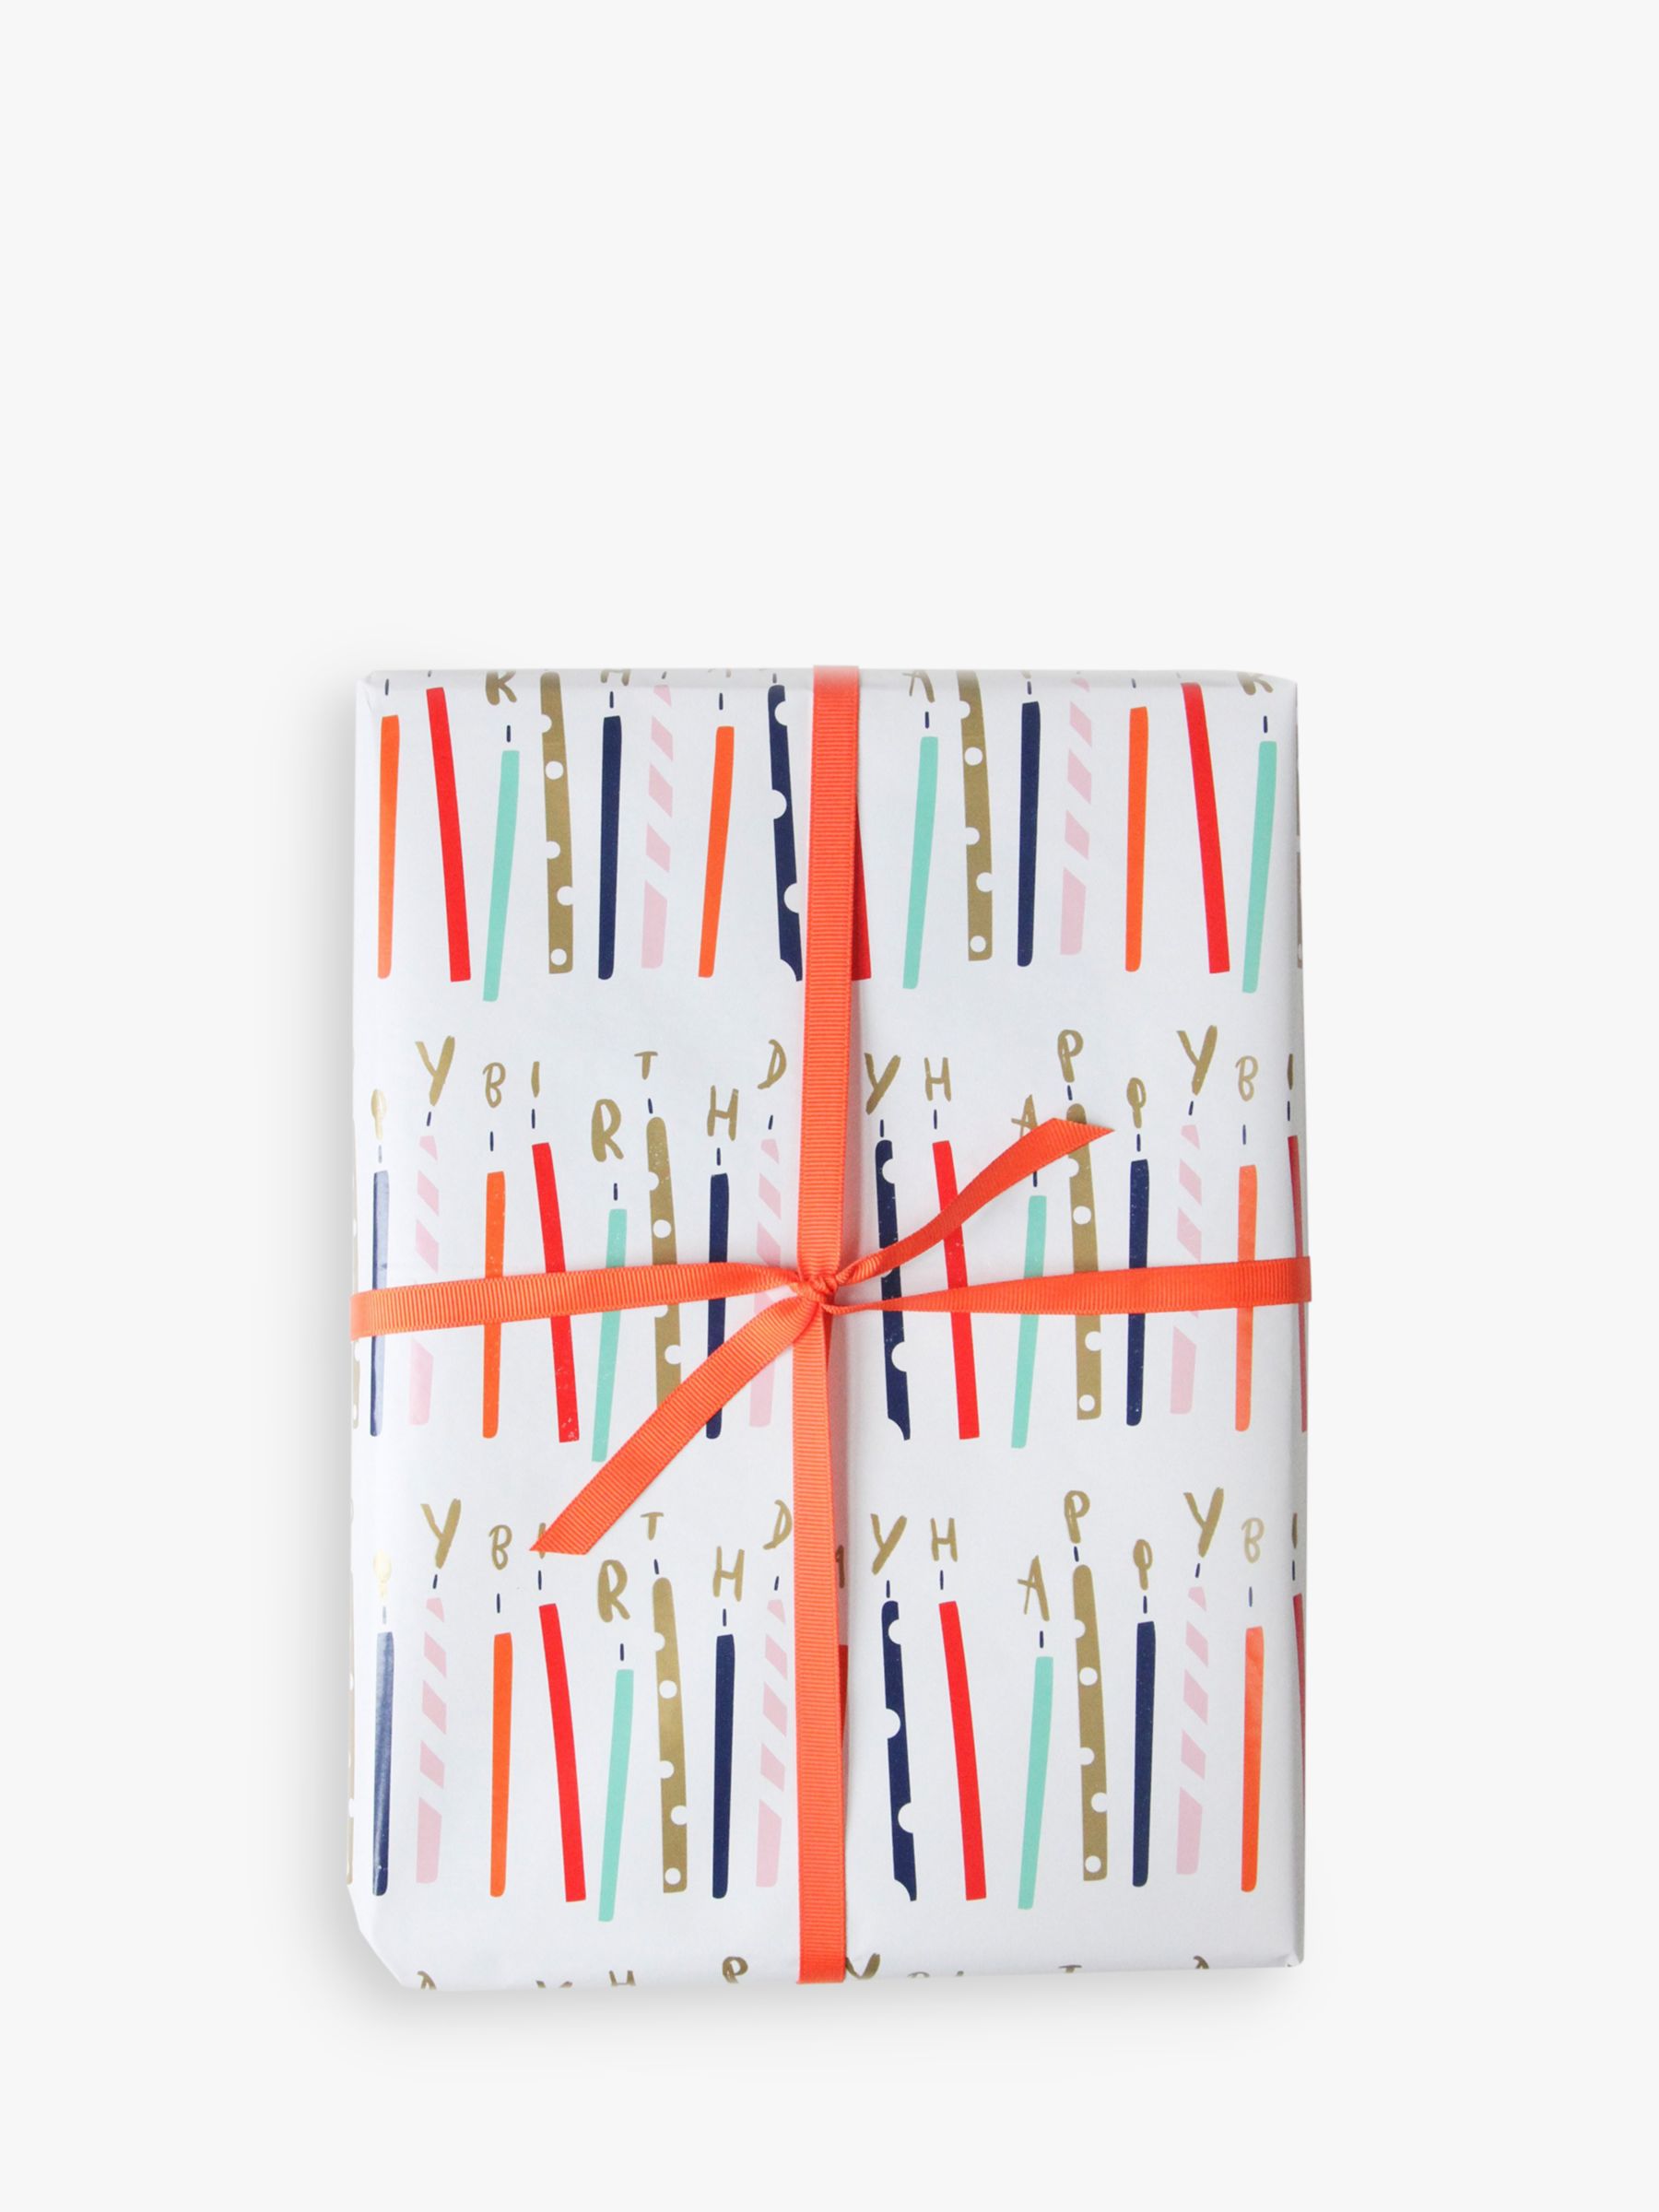 Sweet Pea Floral Print Wrapping Paper By Caroline Gardner